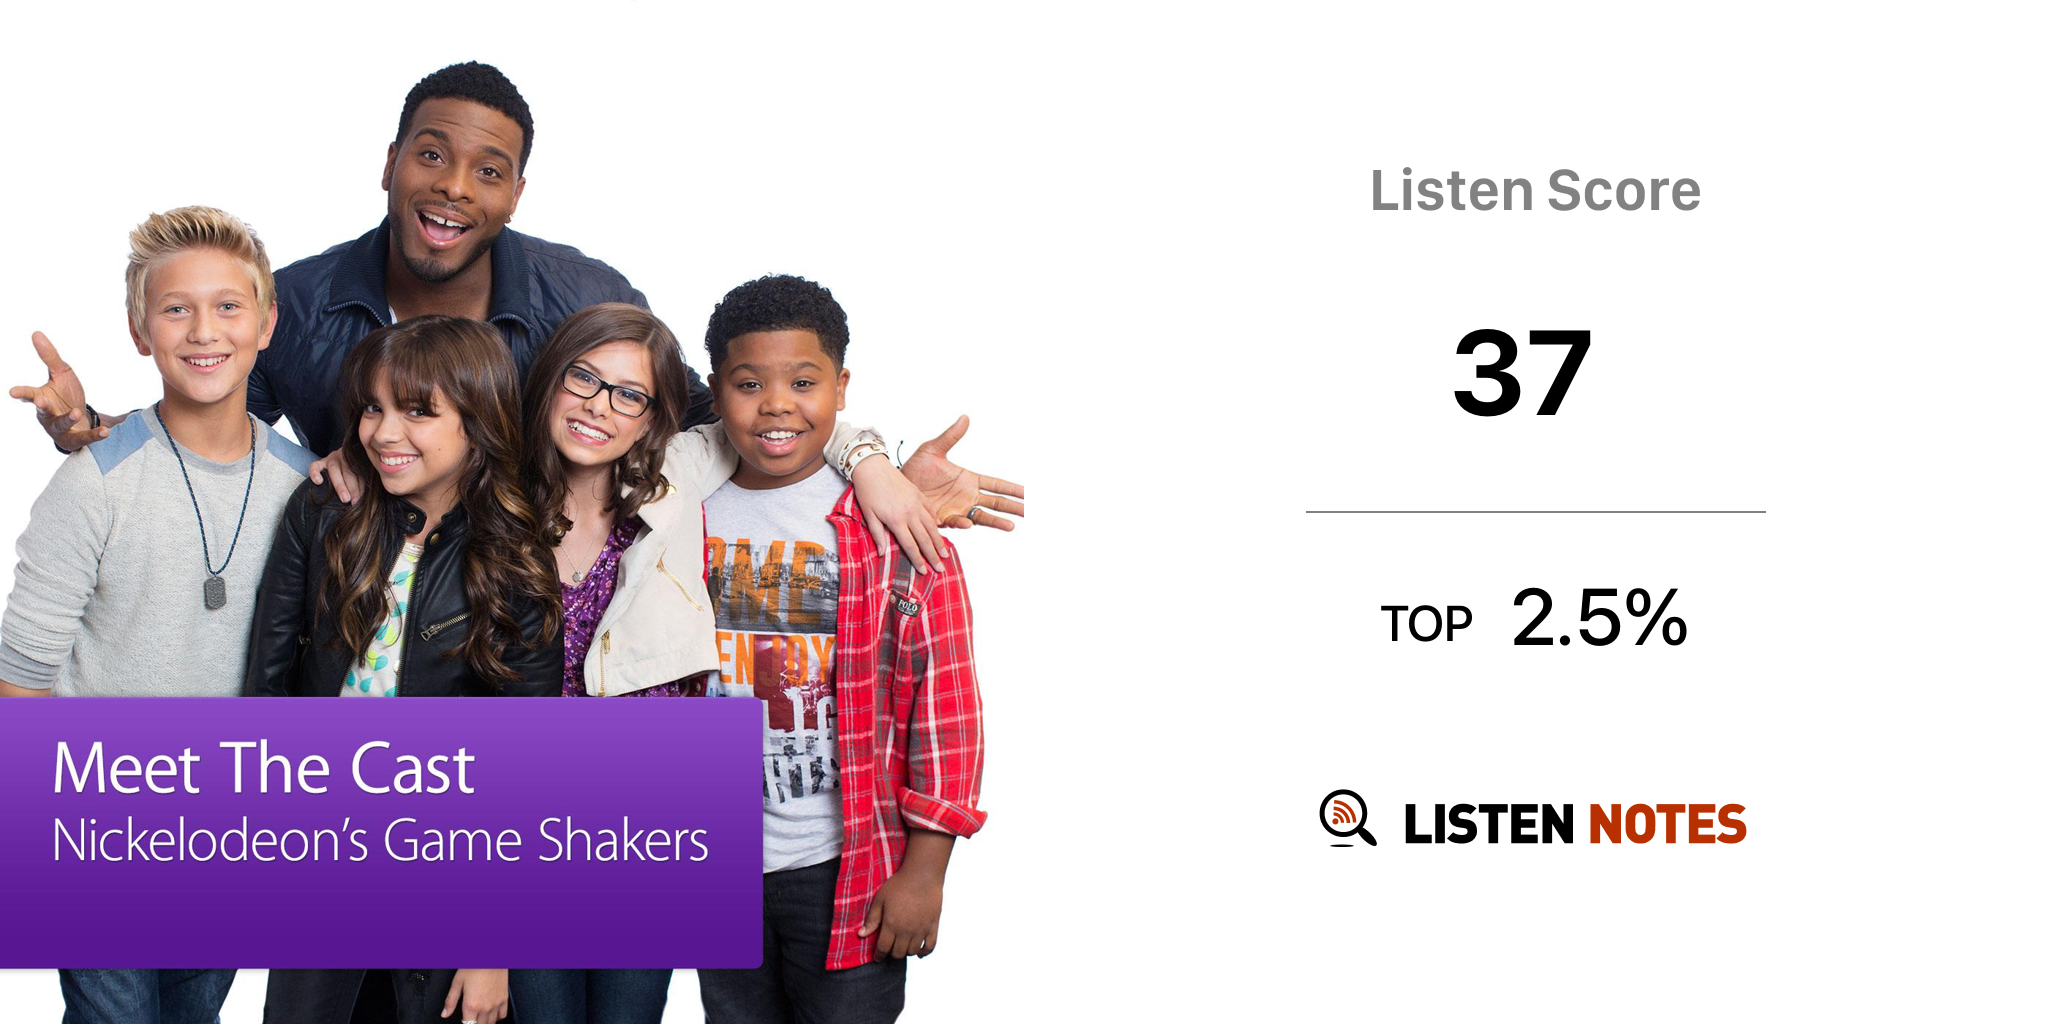 Nickelodeon's Game Shakers: Meet the Cast (podcast) - Apple